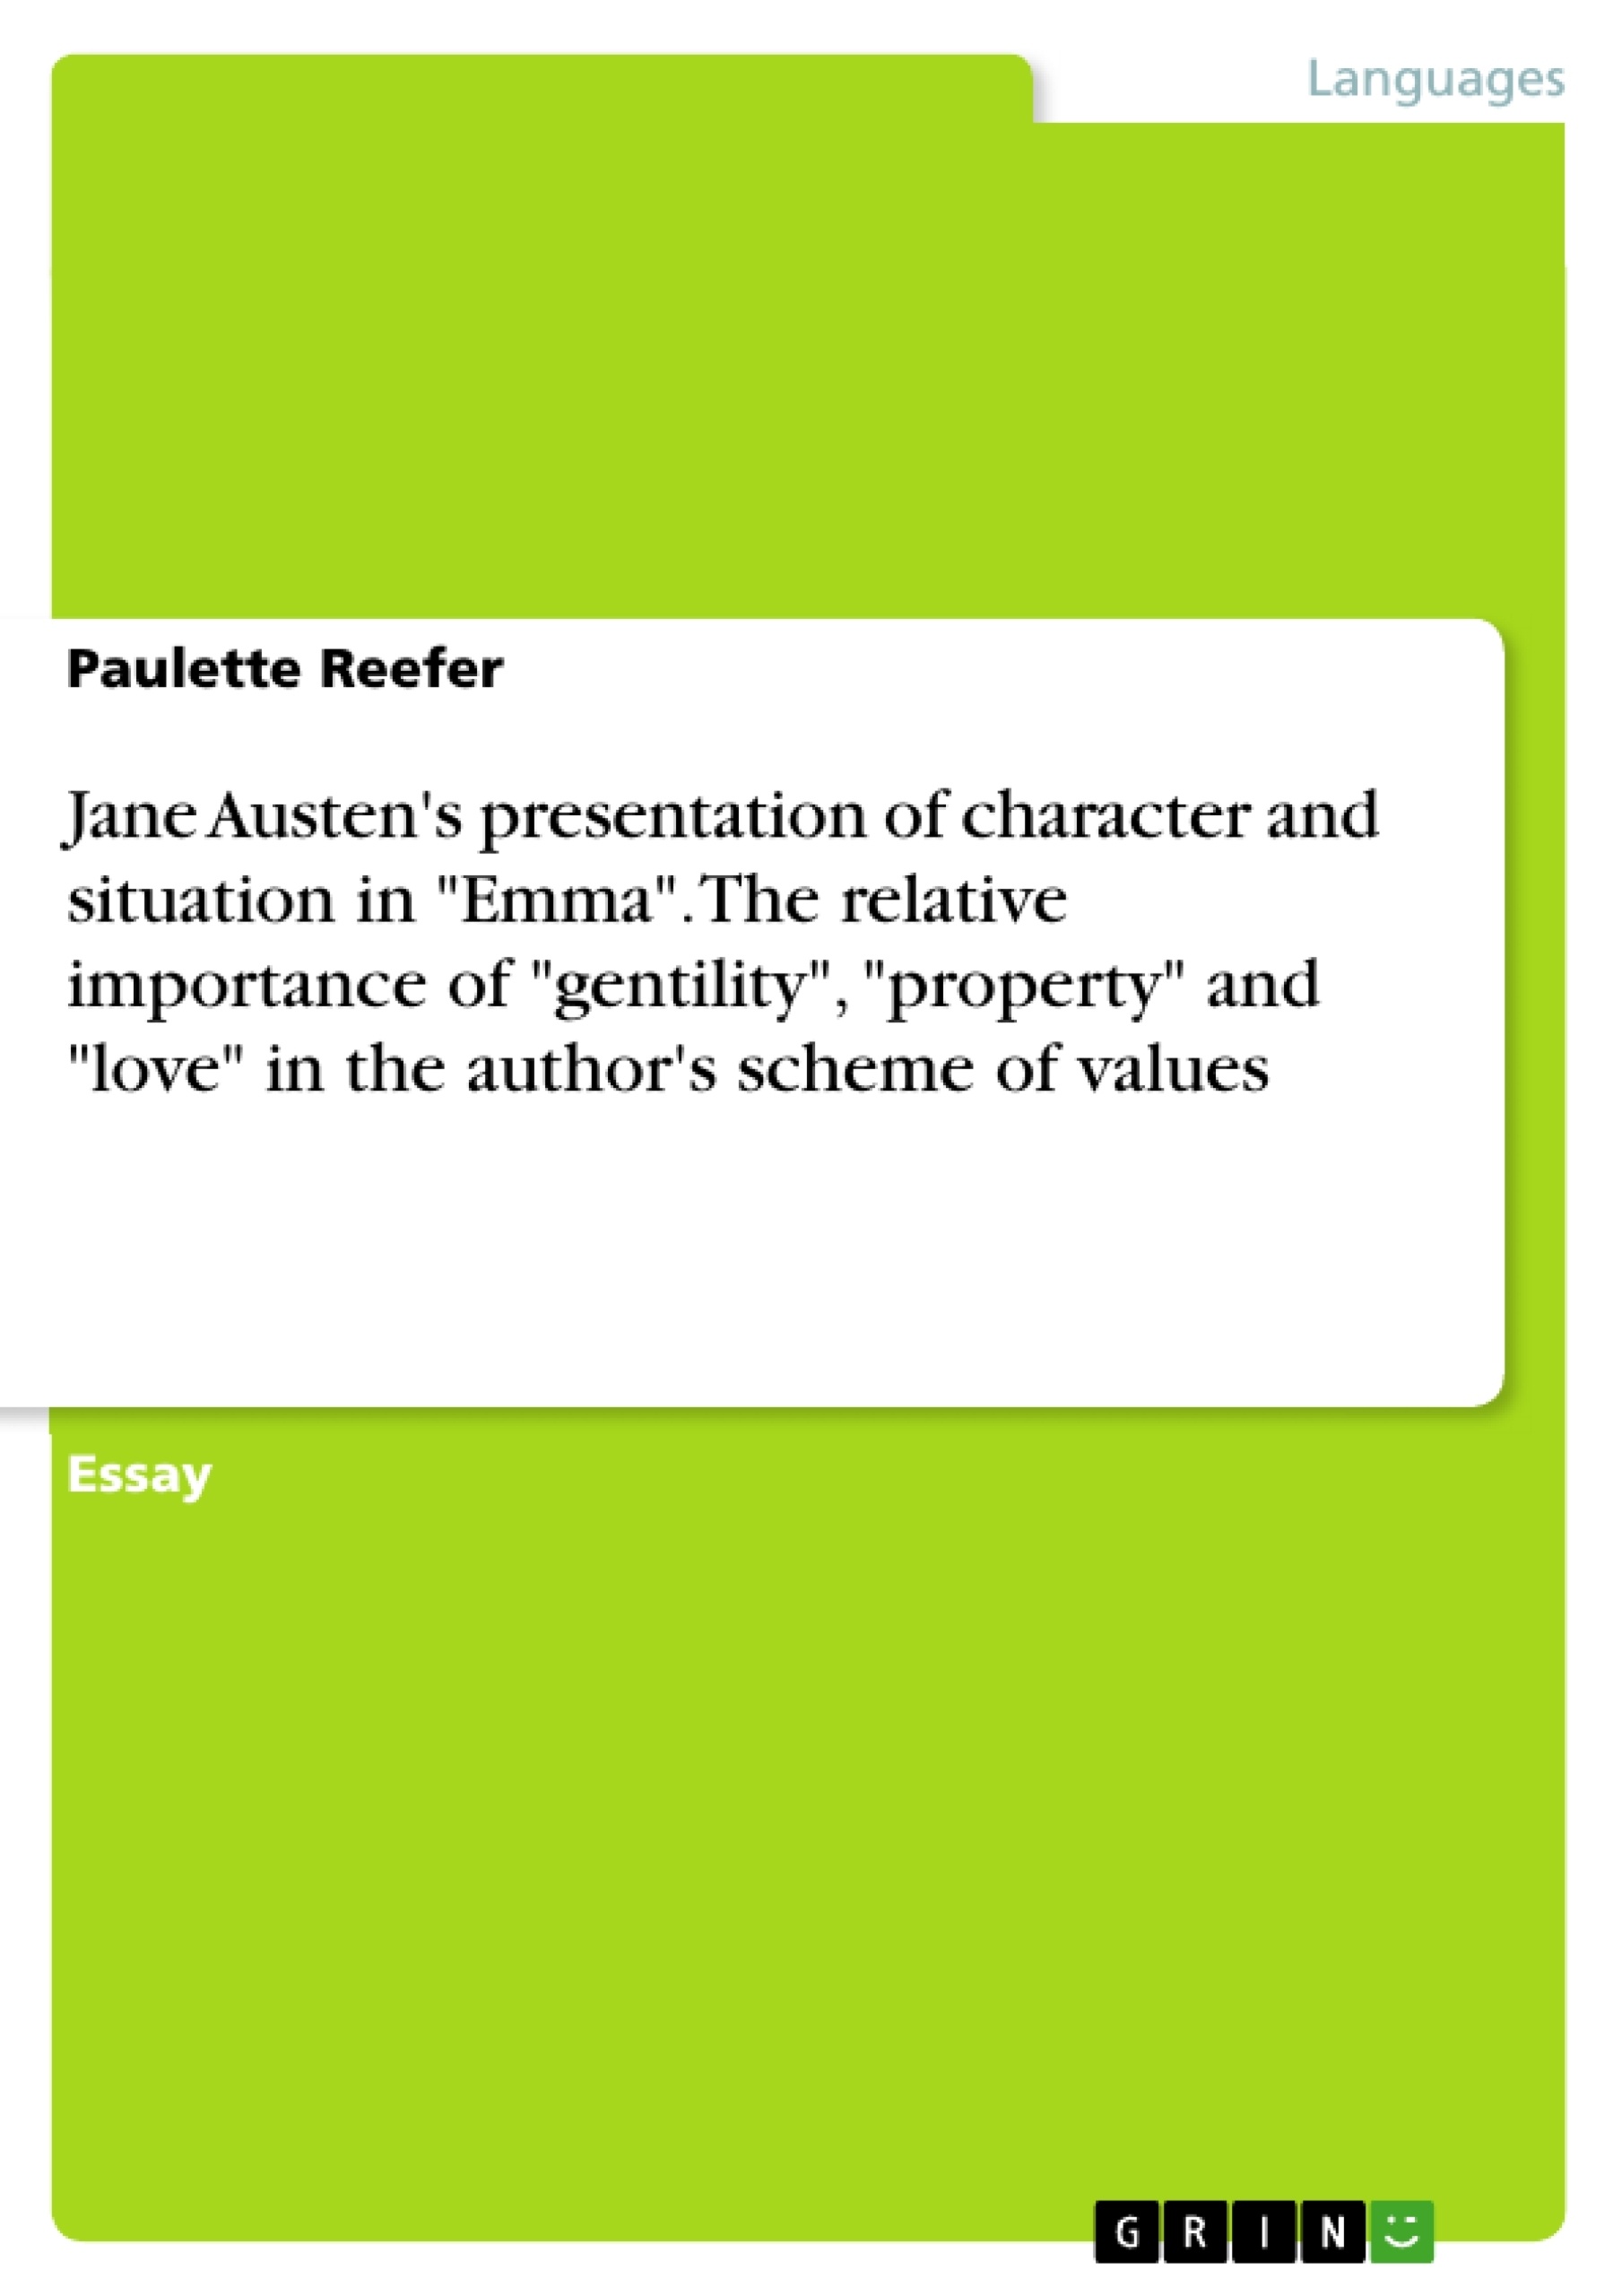 Título: Jane Austen's presentation of character and situation in "Emma". The relative importance of "gentility", "property" and "love" in the author's scheme of values